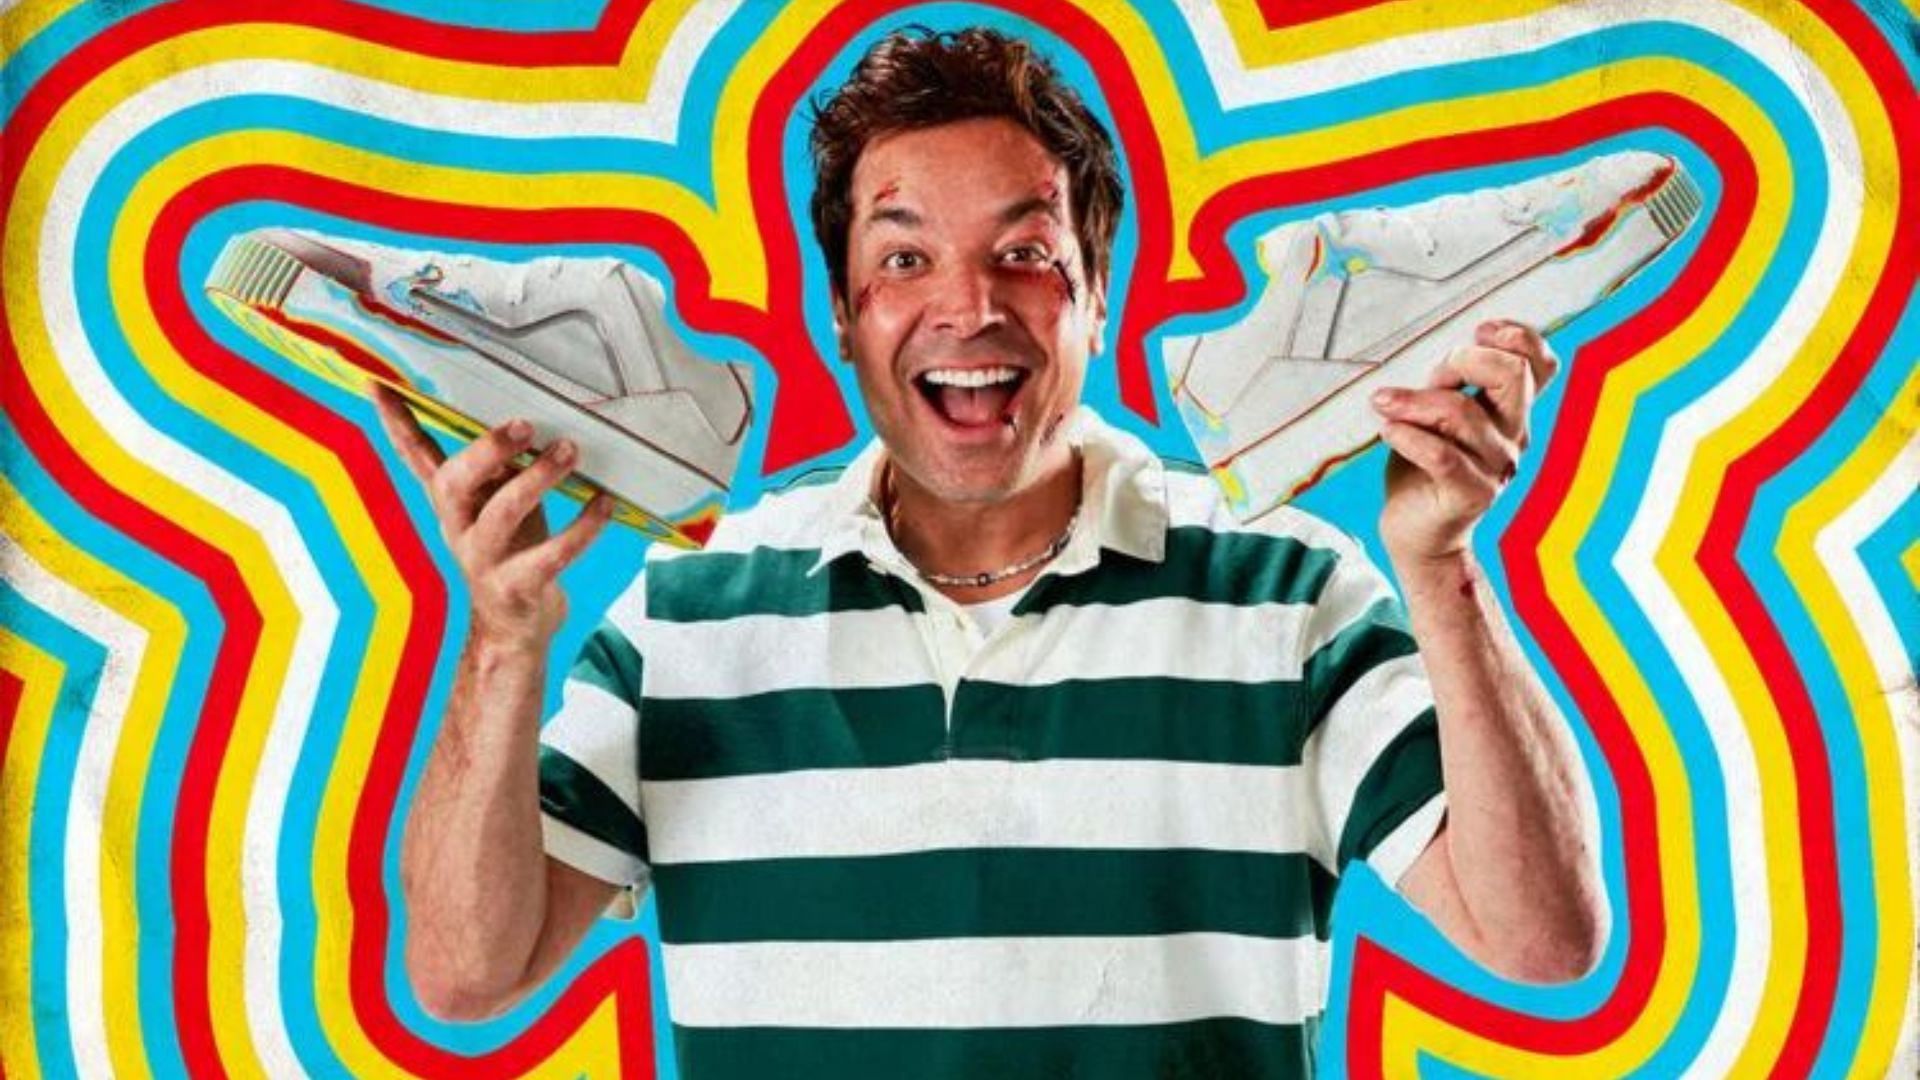 Jimmy Fallon limited-edition sneakers (Image via MSCHF)